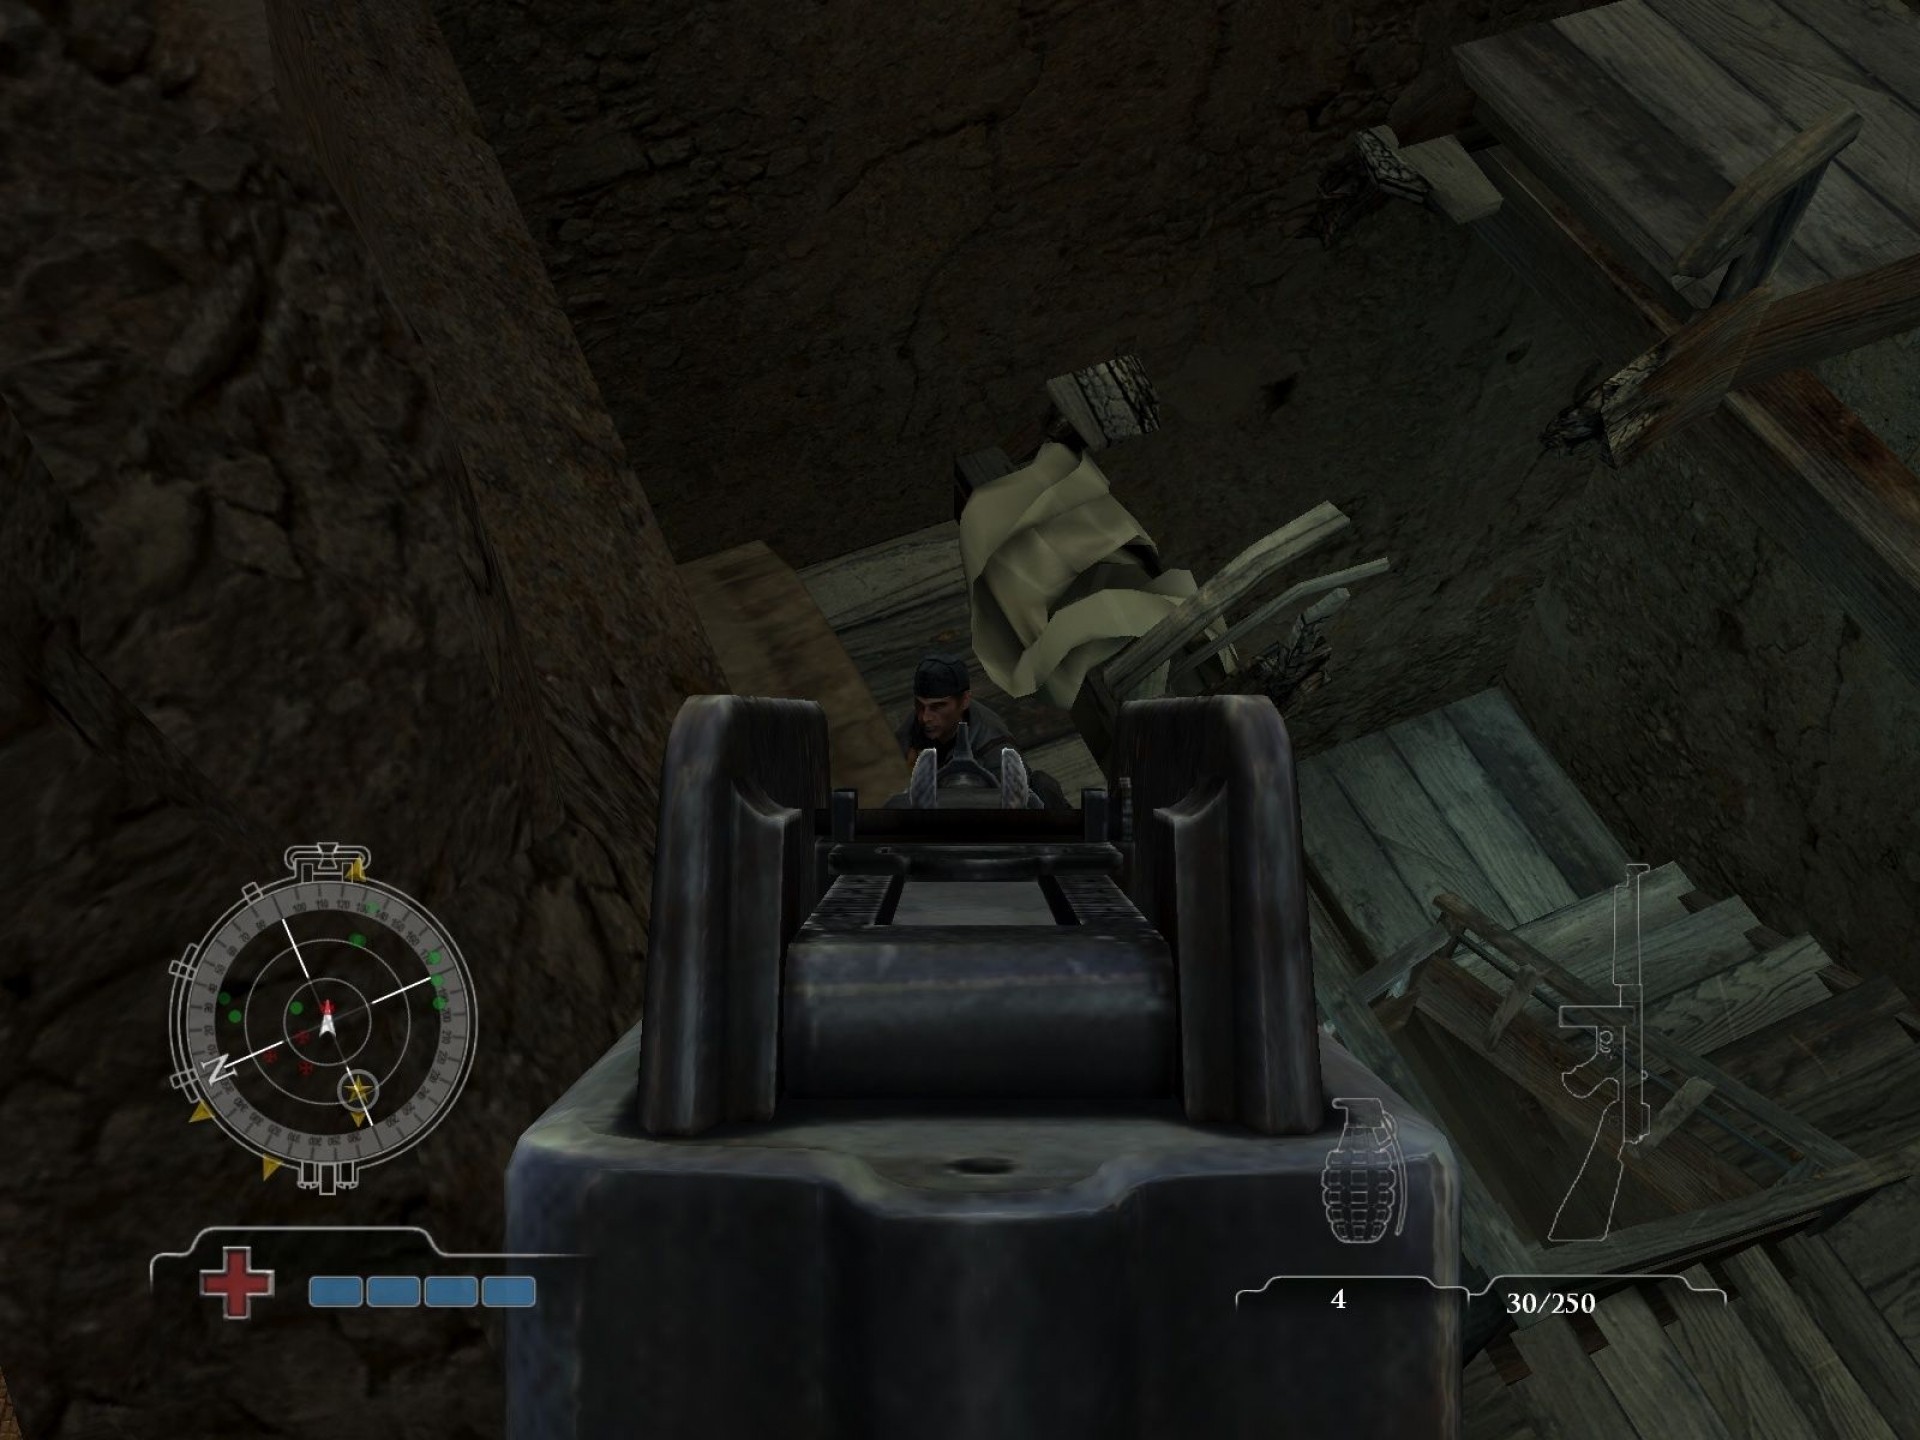 Physx medal of honor